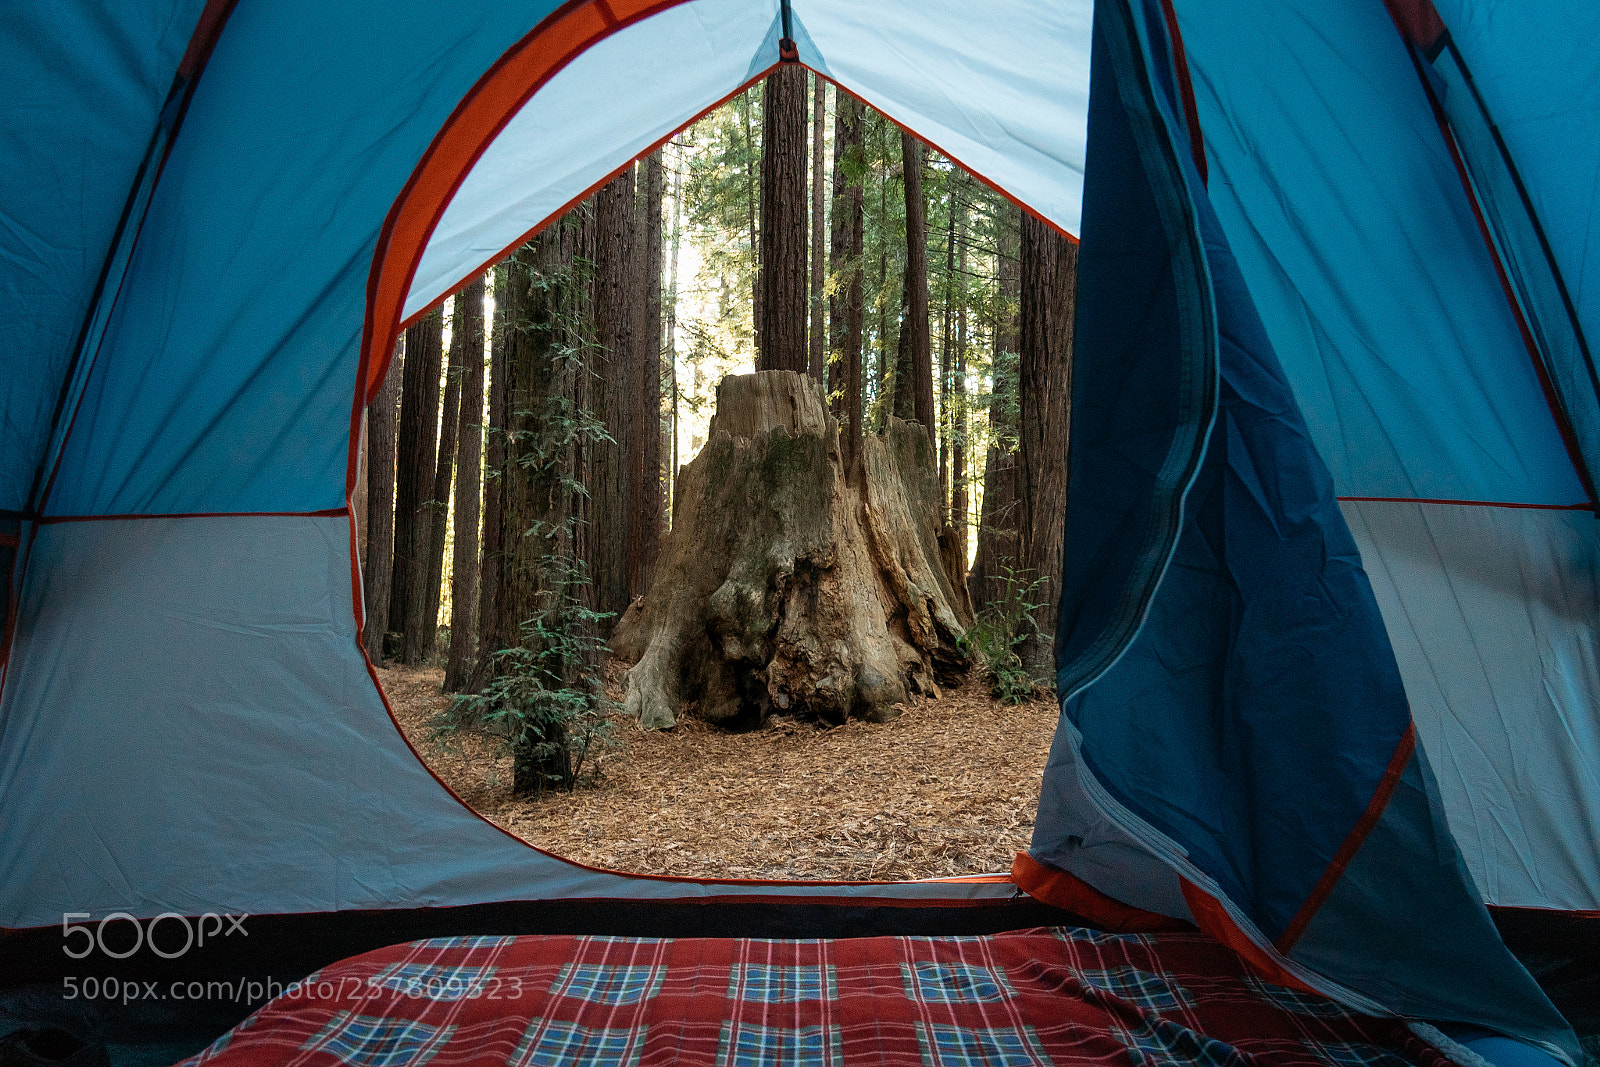 Sony a99 II sample photo. Camping among redwoods photography